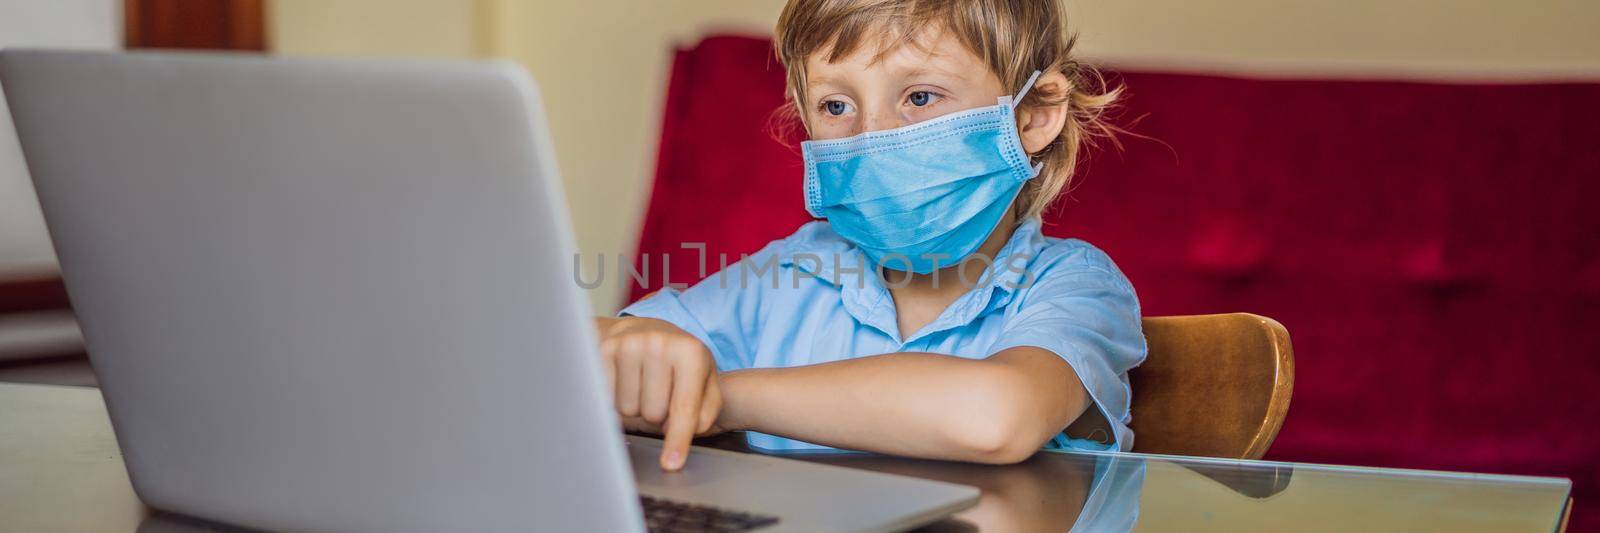 Boy studying online at home using laptop in medical masks to protect against coronovirus. Studying during quarantine. Global pandemic covid19 virus. BANNER, LONG FORMAT